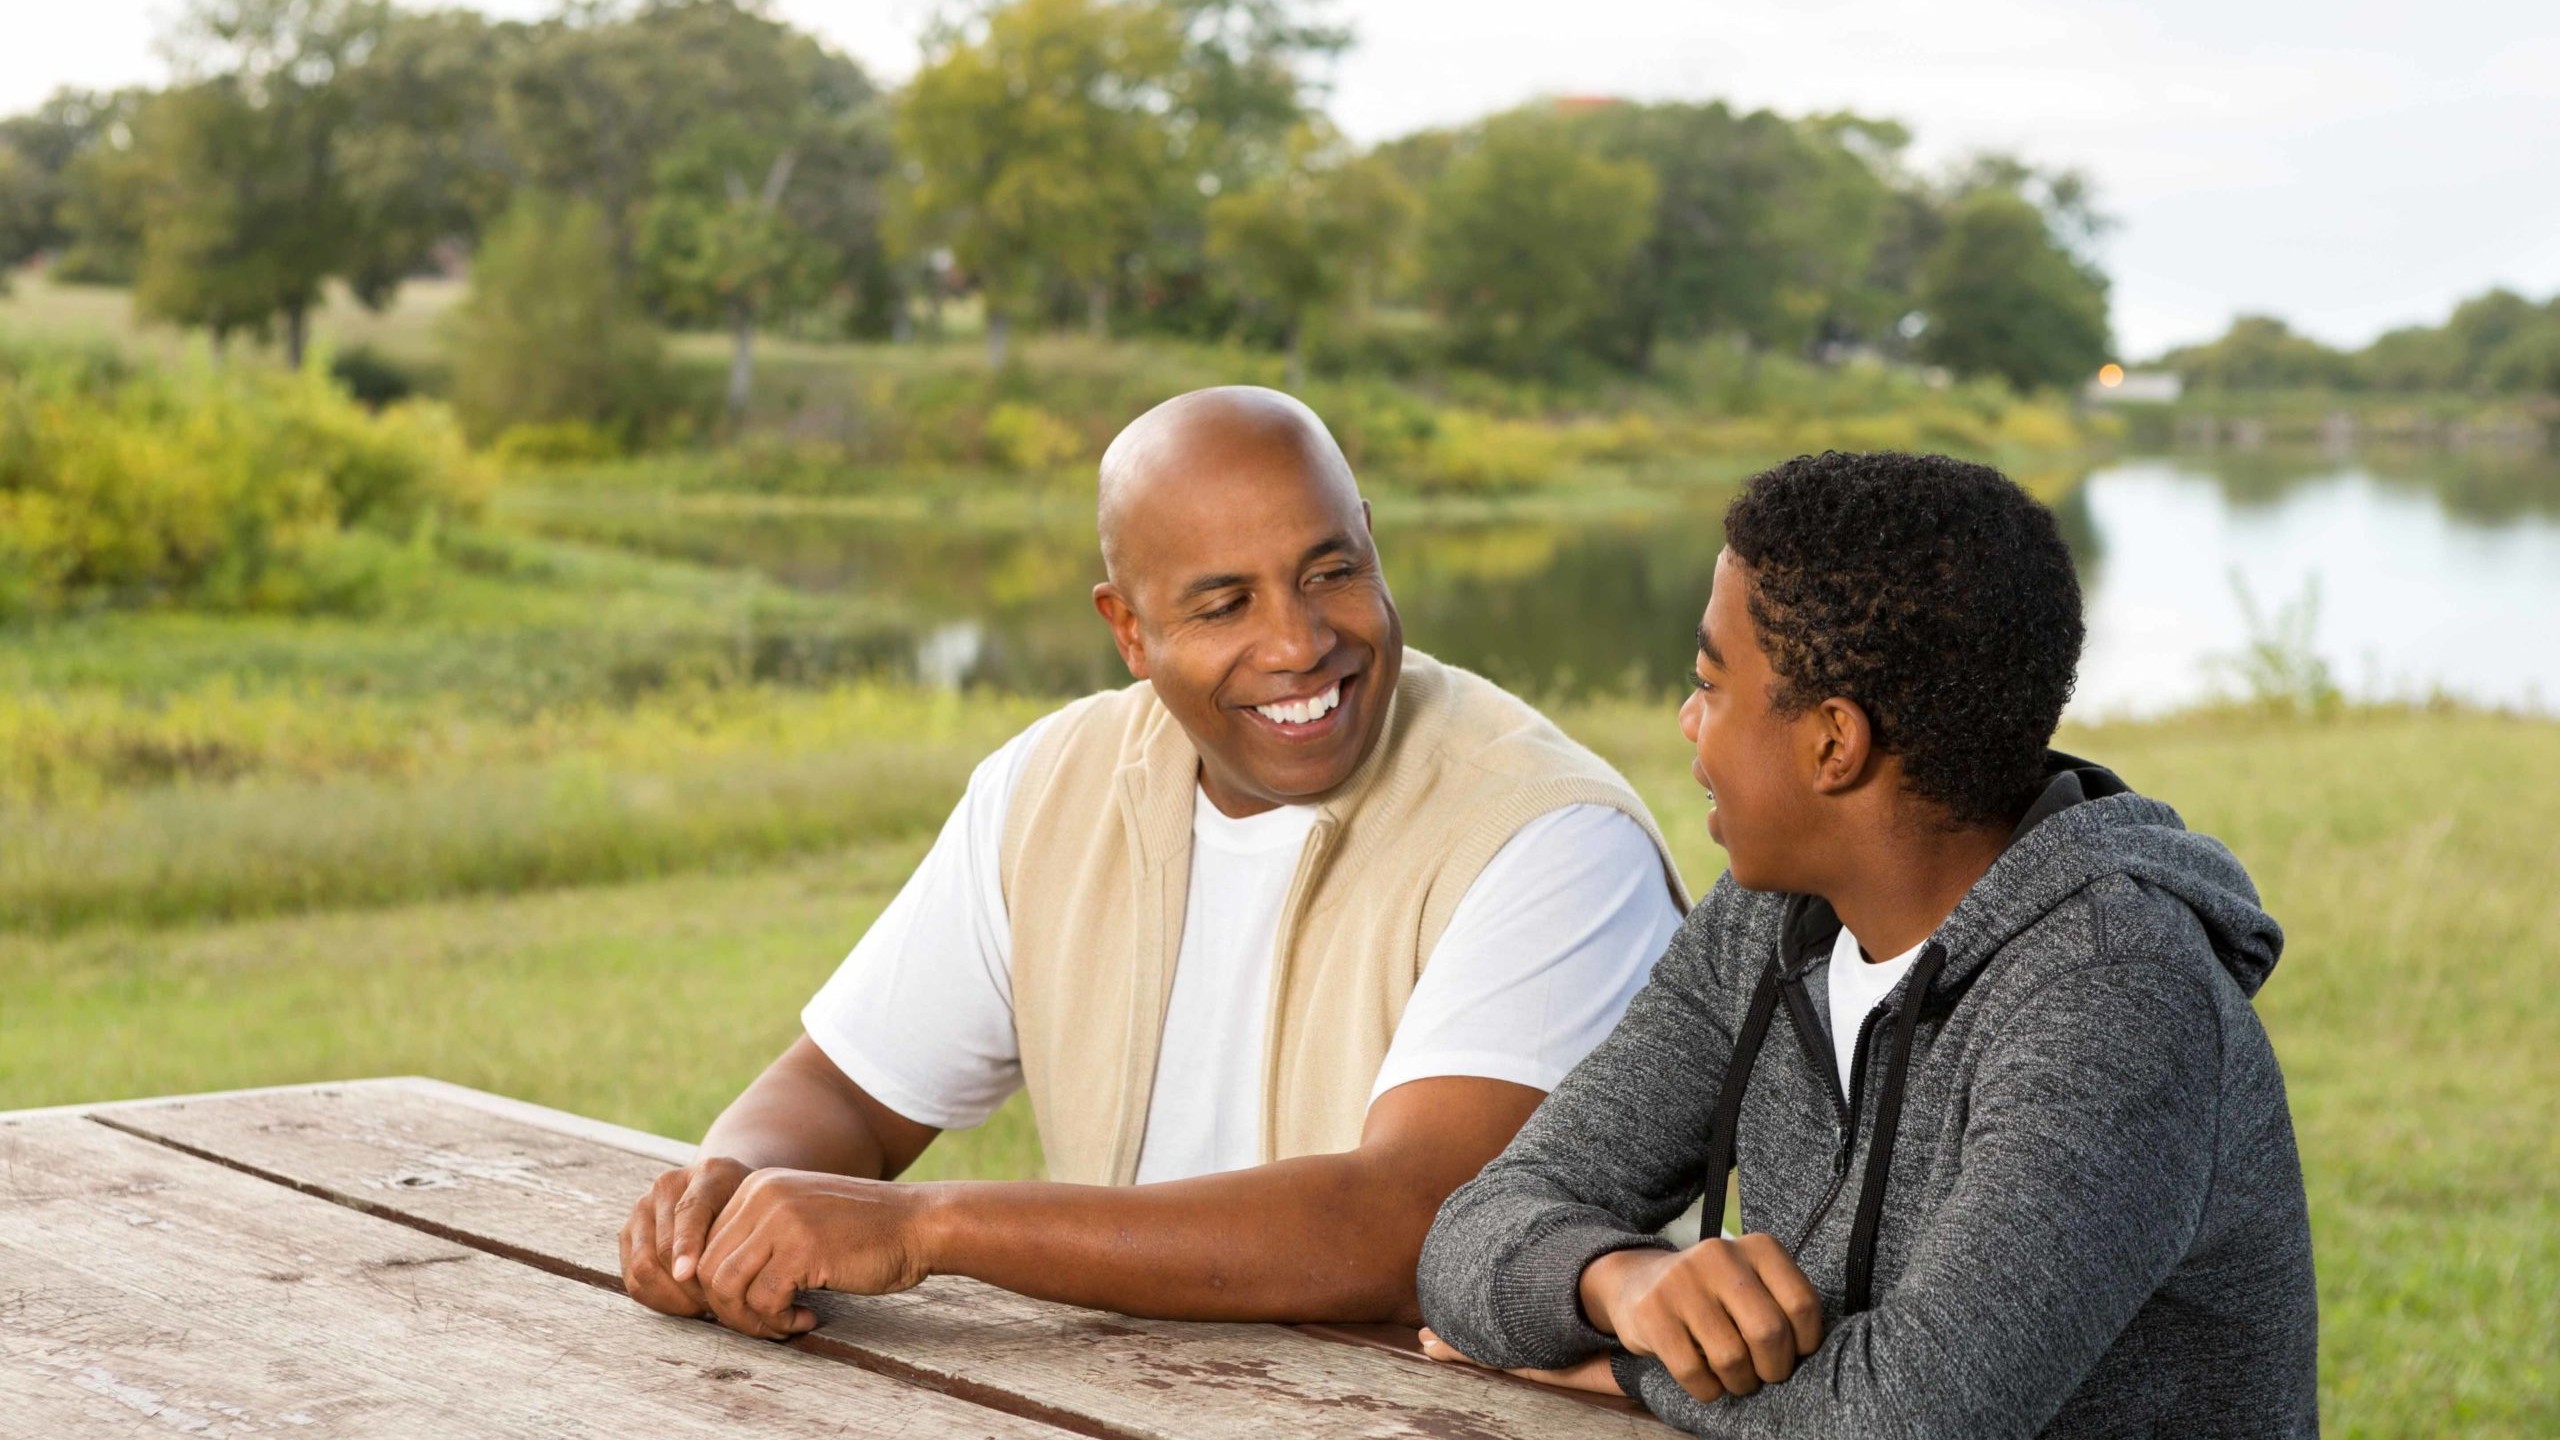 Father and teenage son have a conversation in a park.